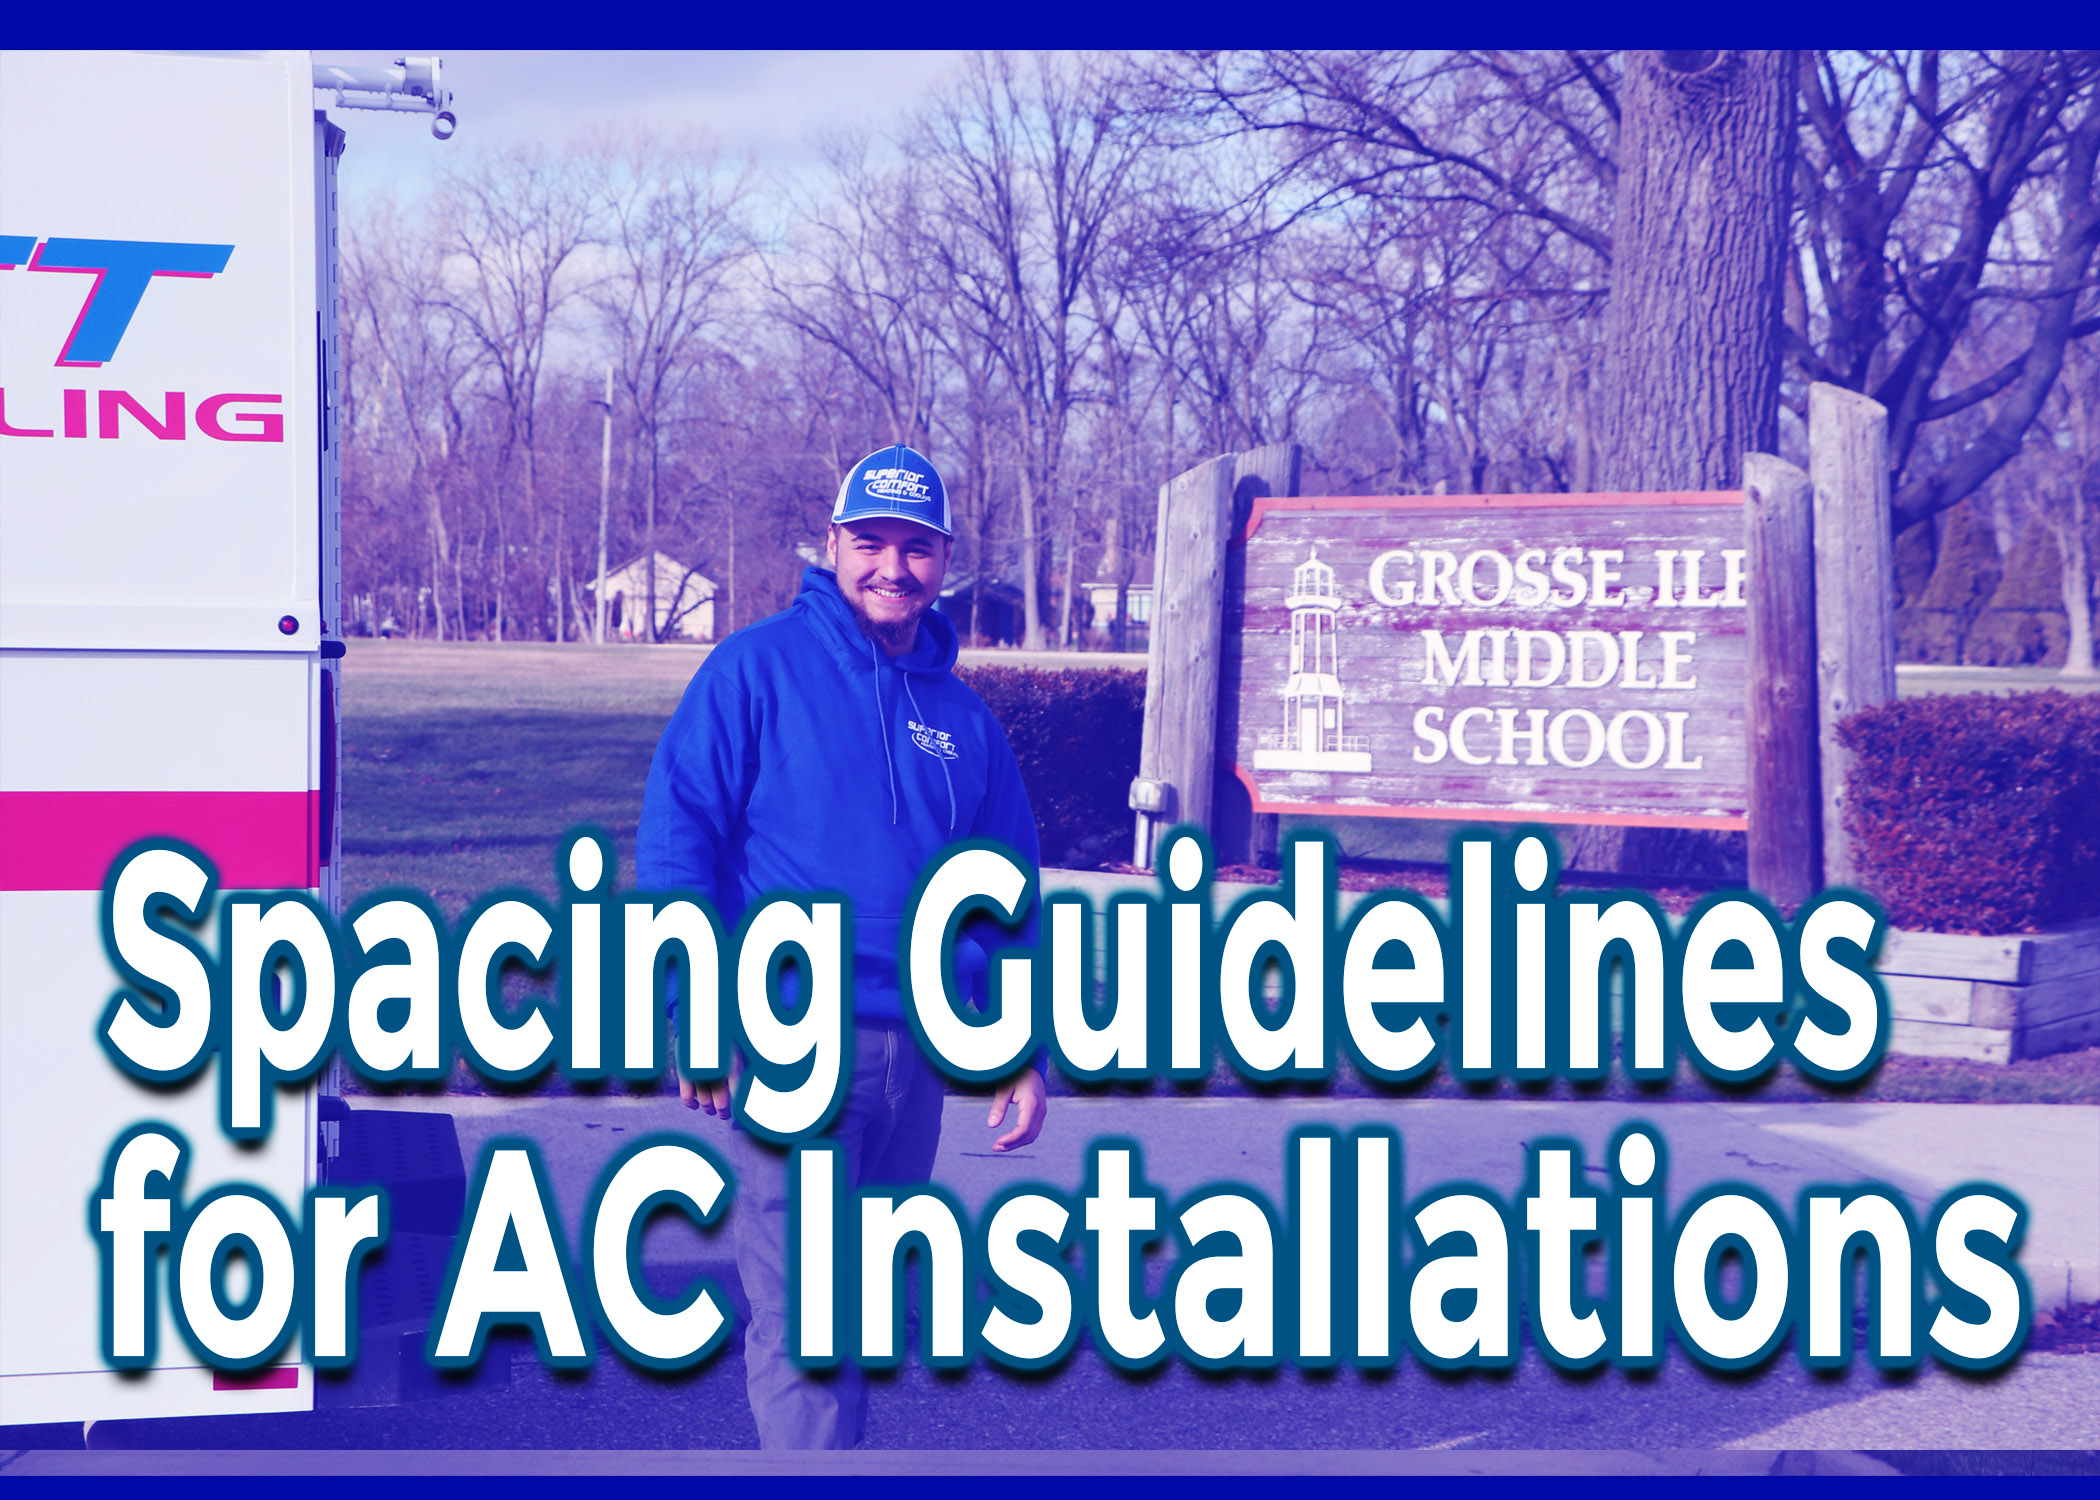 AC Services Grosse Ile Mi. Spacing Guidelines for AC Installations